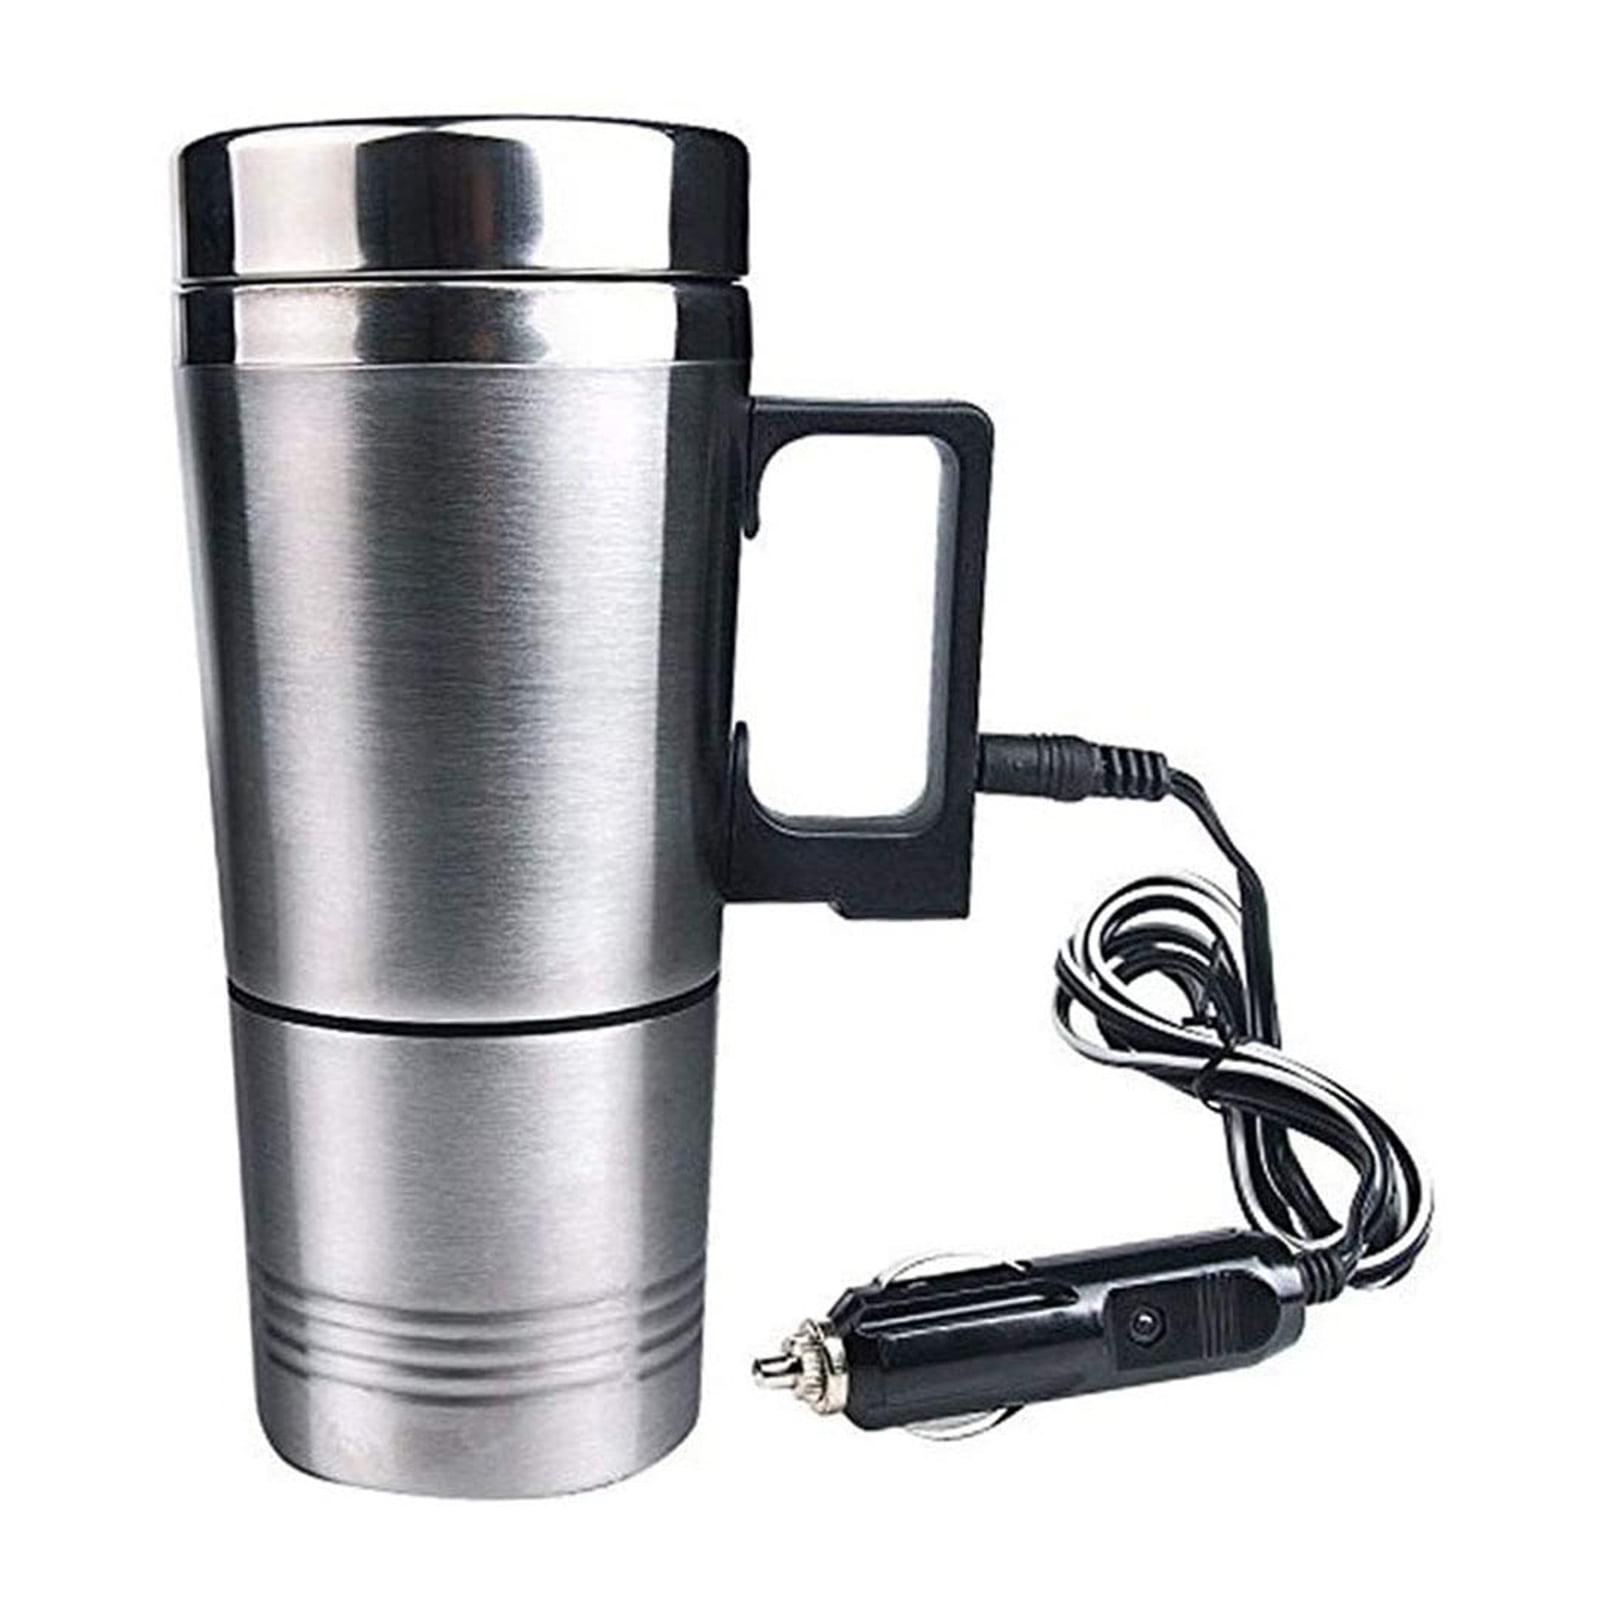 400ml Vacuum Insulated Stainless Steel Travel Mug Car Cup with Charger Car  Boiling Mug Electric Kettle Boiling Vehicle Thermos with DC12V Heating Cup